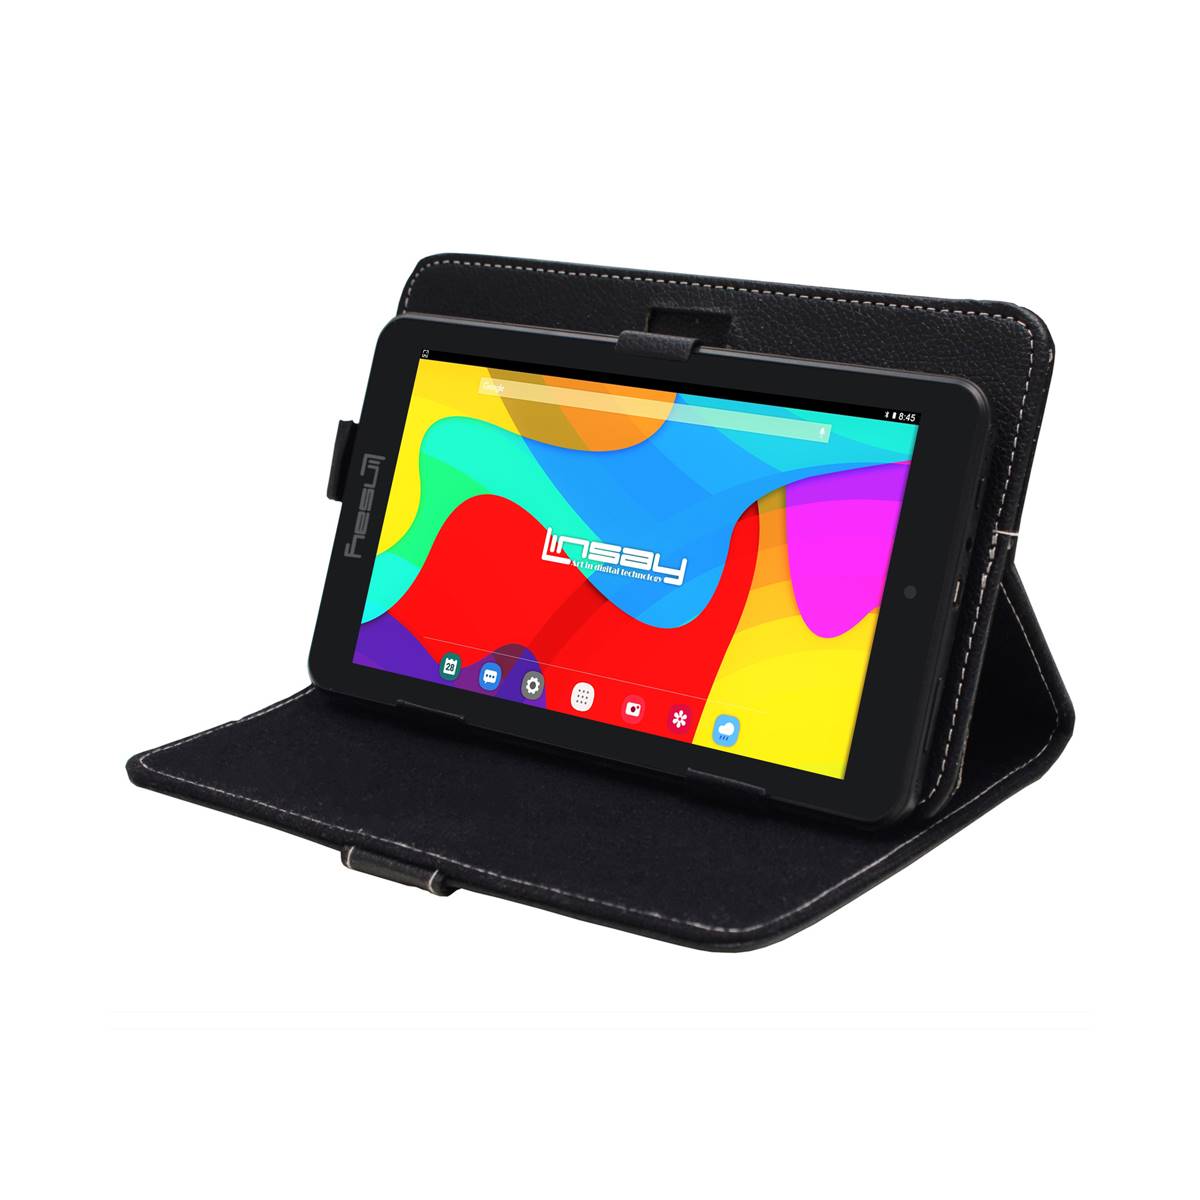 Linsay 7in. Quad Core Tablet With Headphones